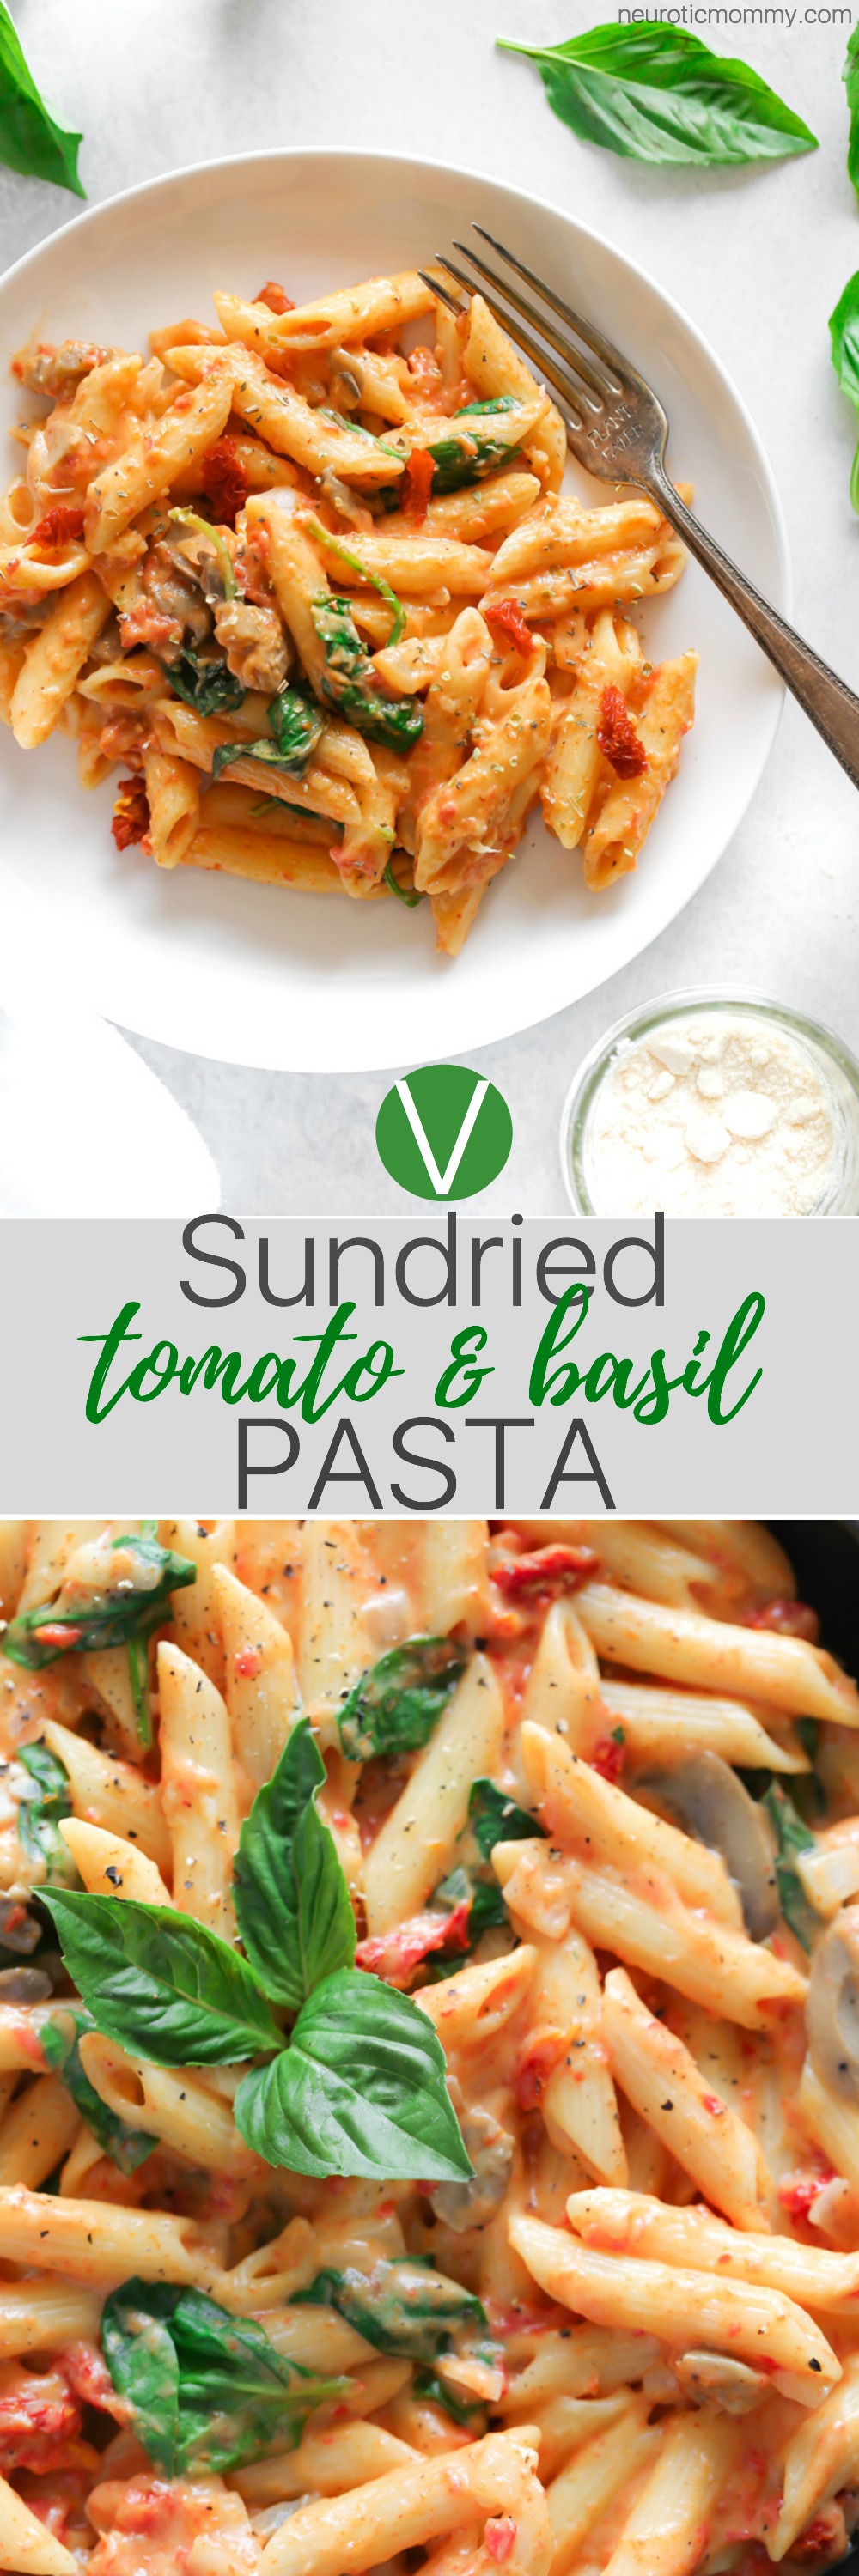 Vegan Sun-dried Tomato Basil Pasta - Just a few ingredients make up this luxuriously creamy sun-dried tomato basil cream sauce. It's perfect for dipping or swirled with your favorite pasta and veggies! - NeuroticMommy.com #vegandinner